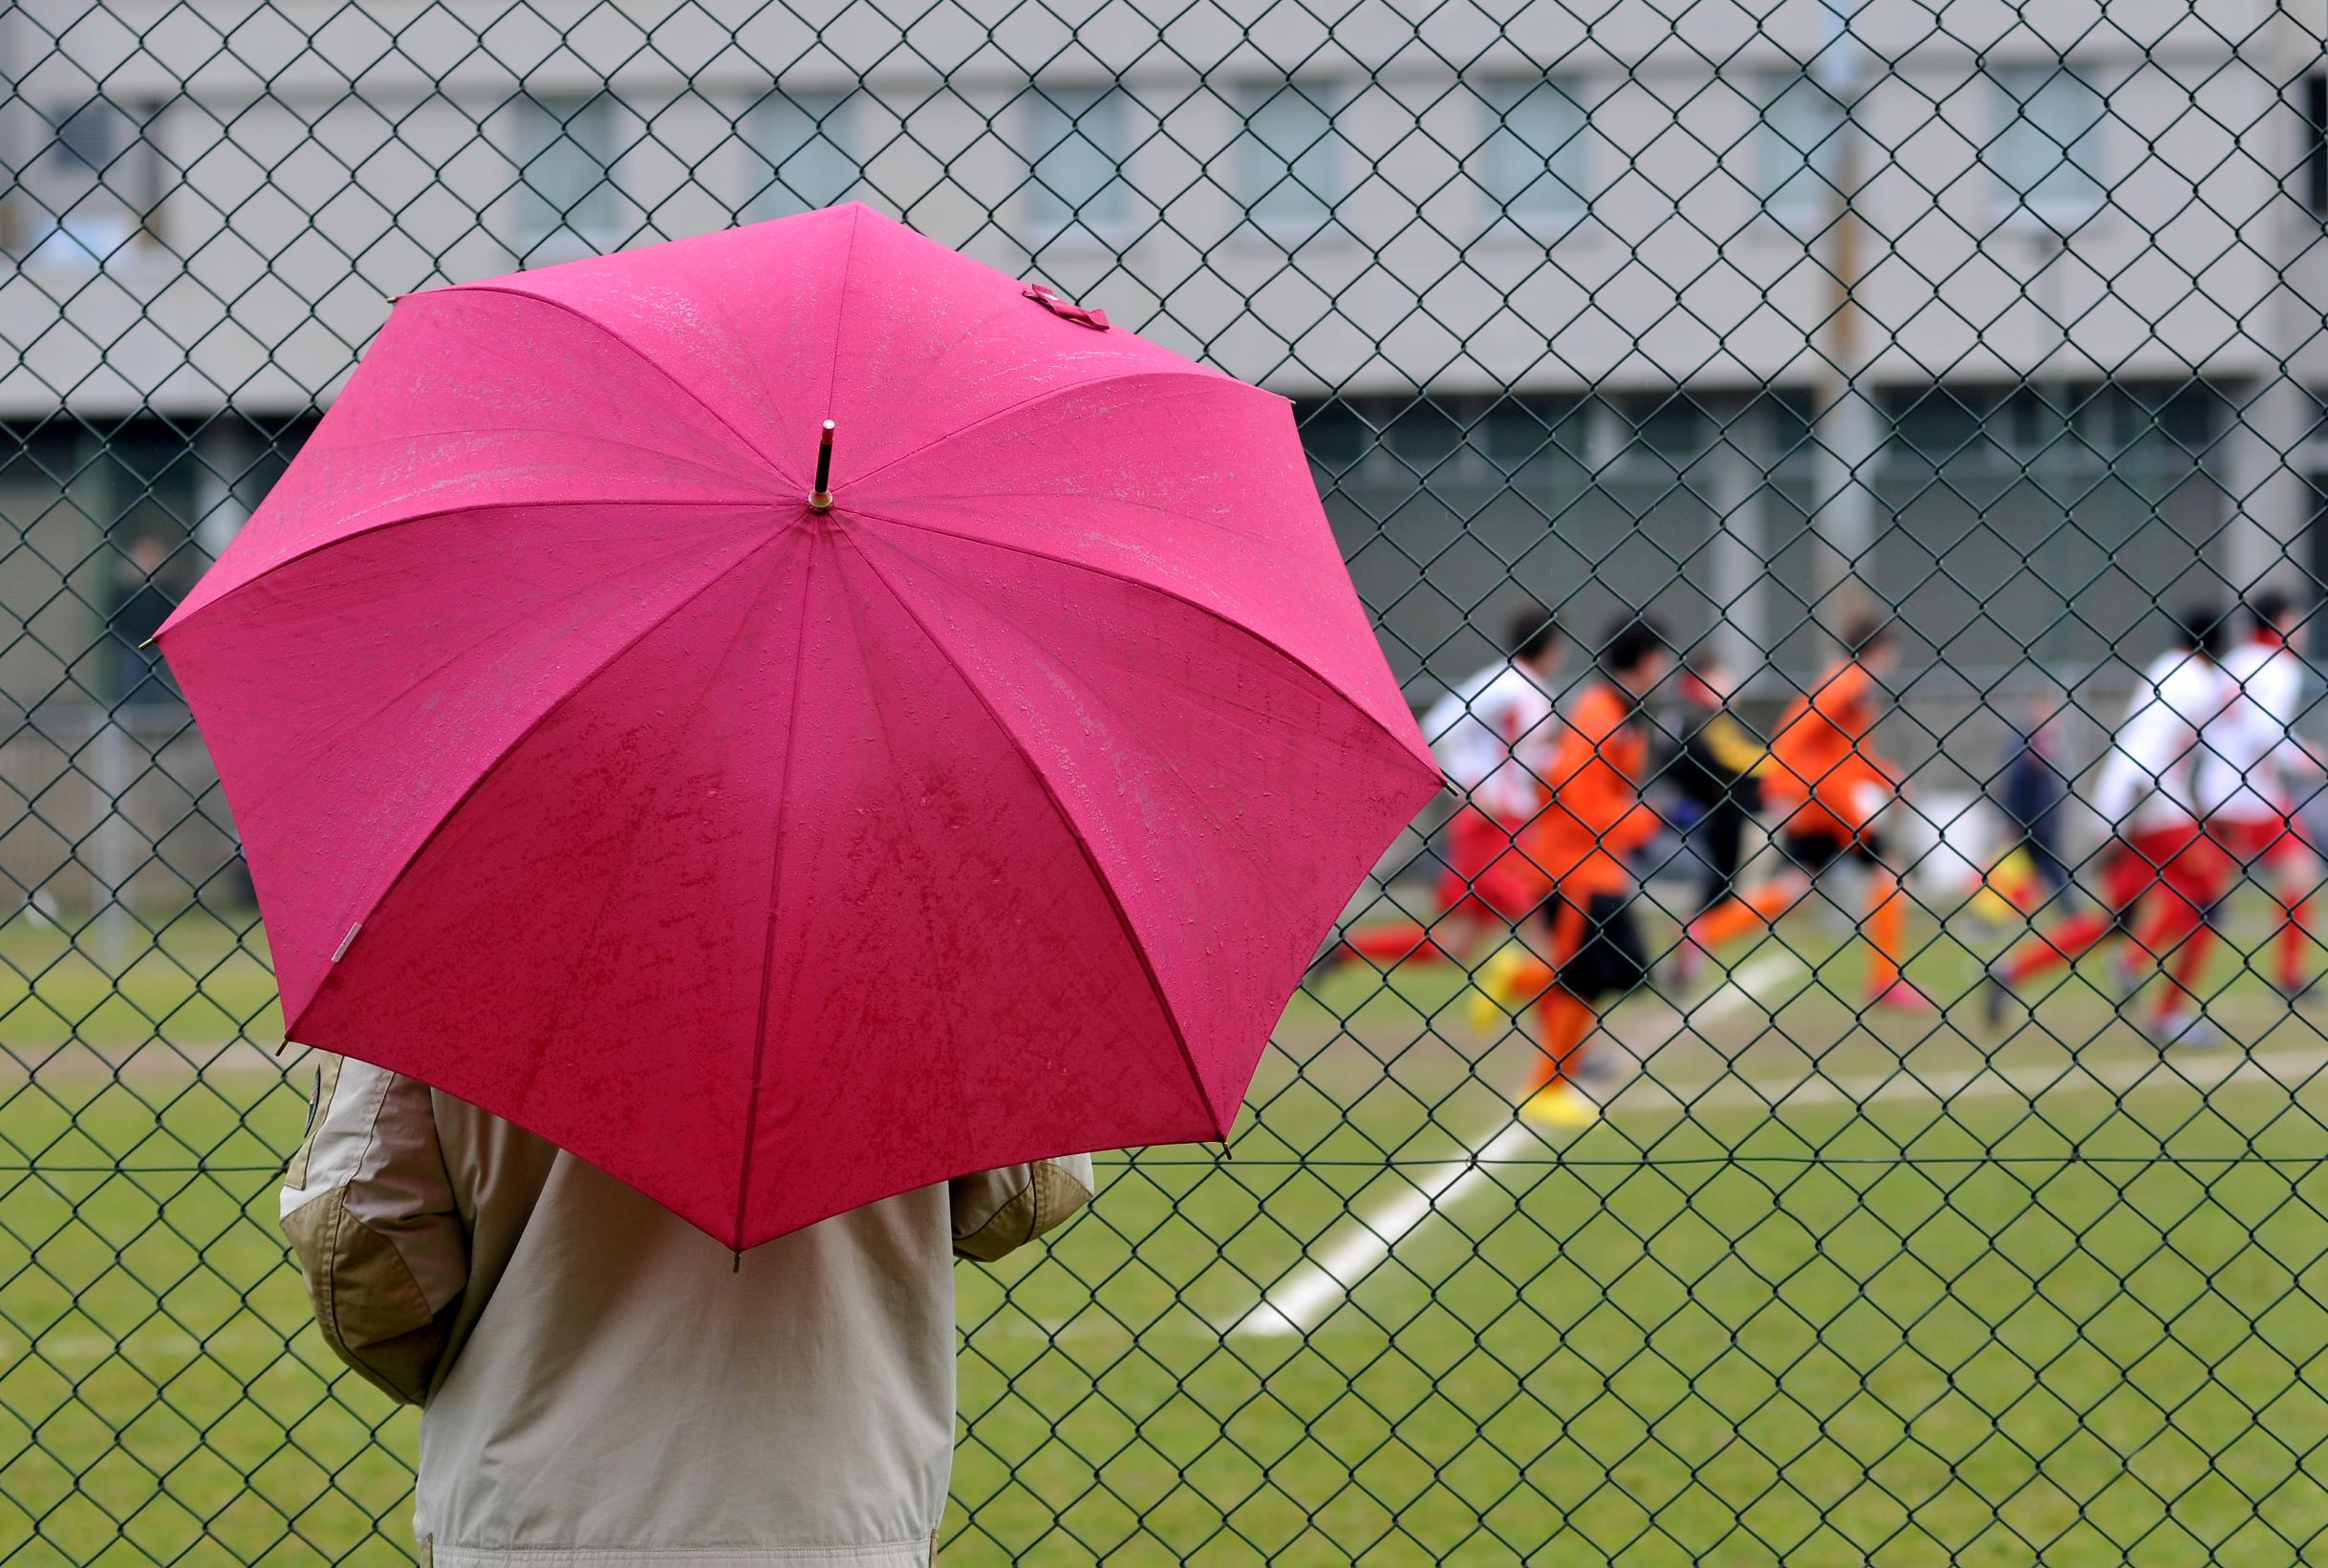 Rear view of a spectator with an umbrella watching a soccer match from the sideline.